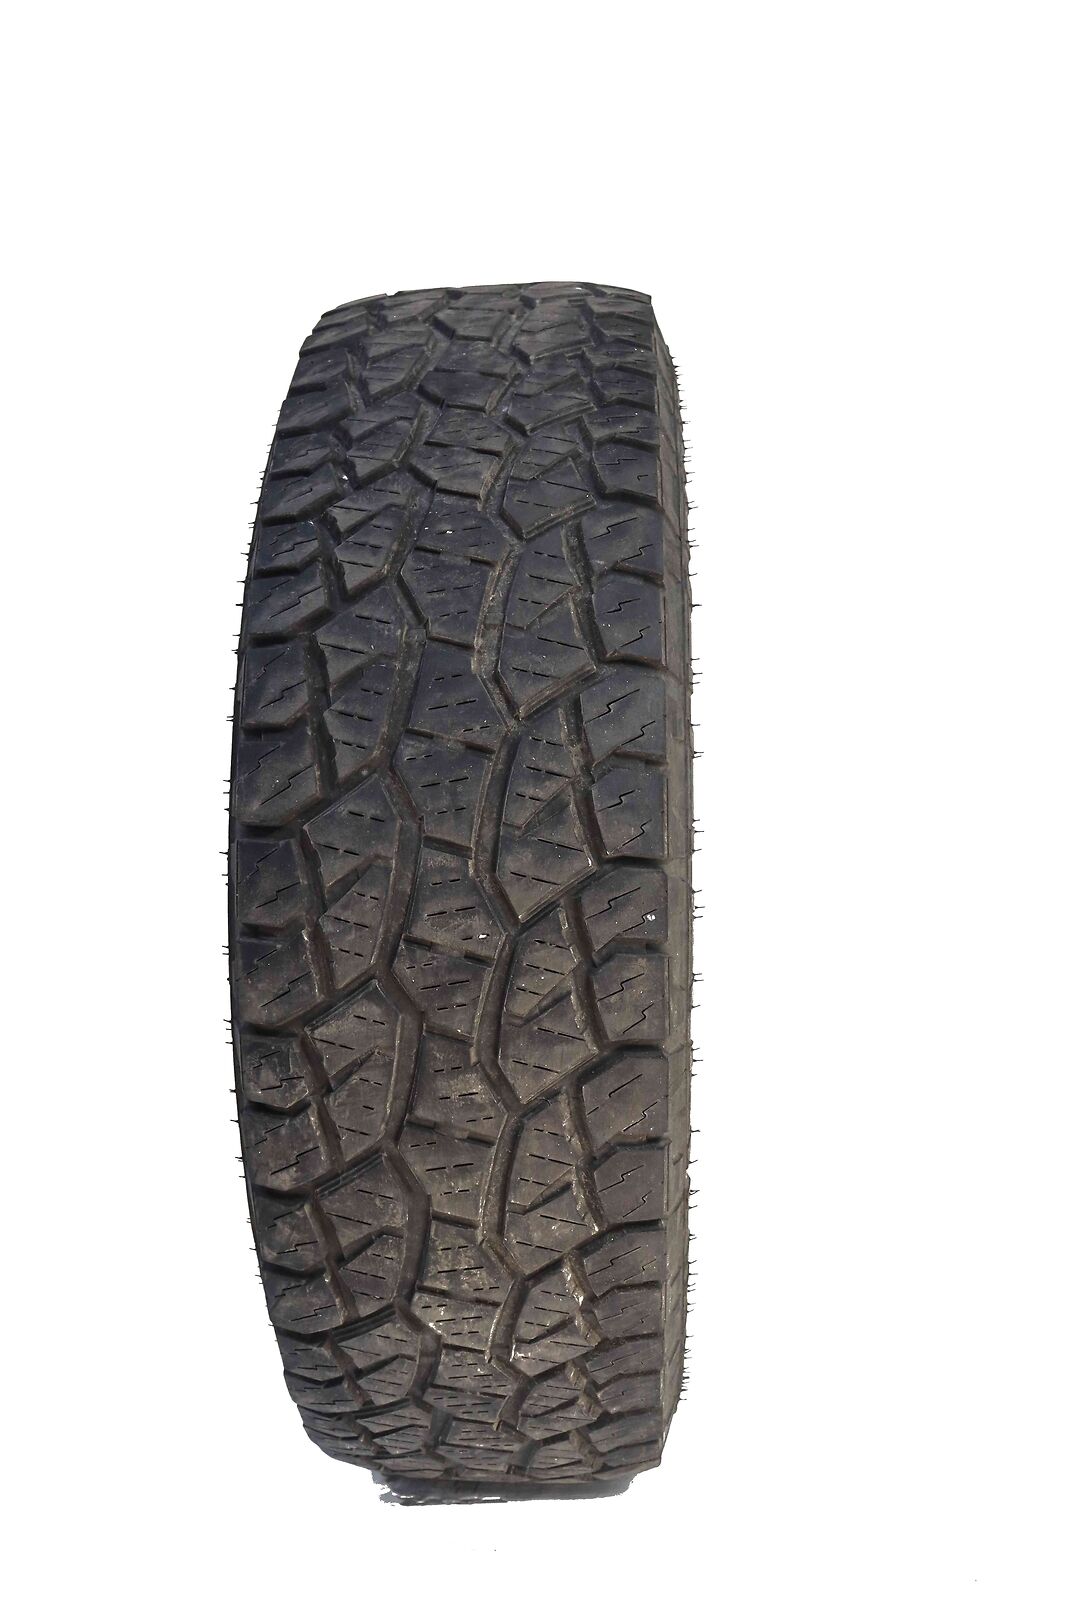 P245/75R16 Pathfinder All Terrain OWL 111 T Used 7/32nds